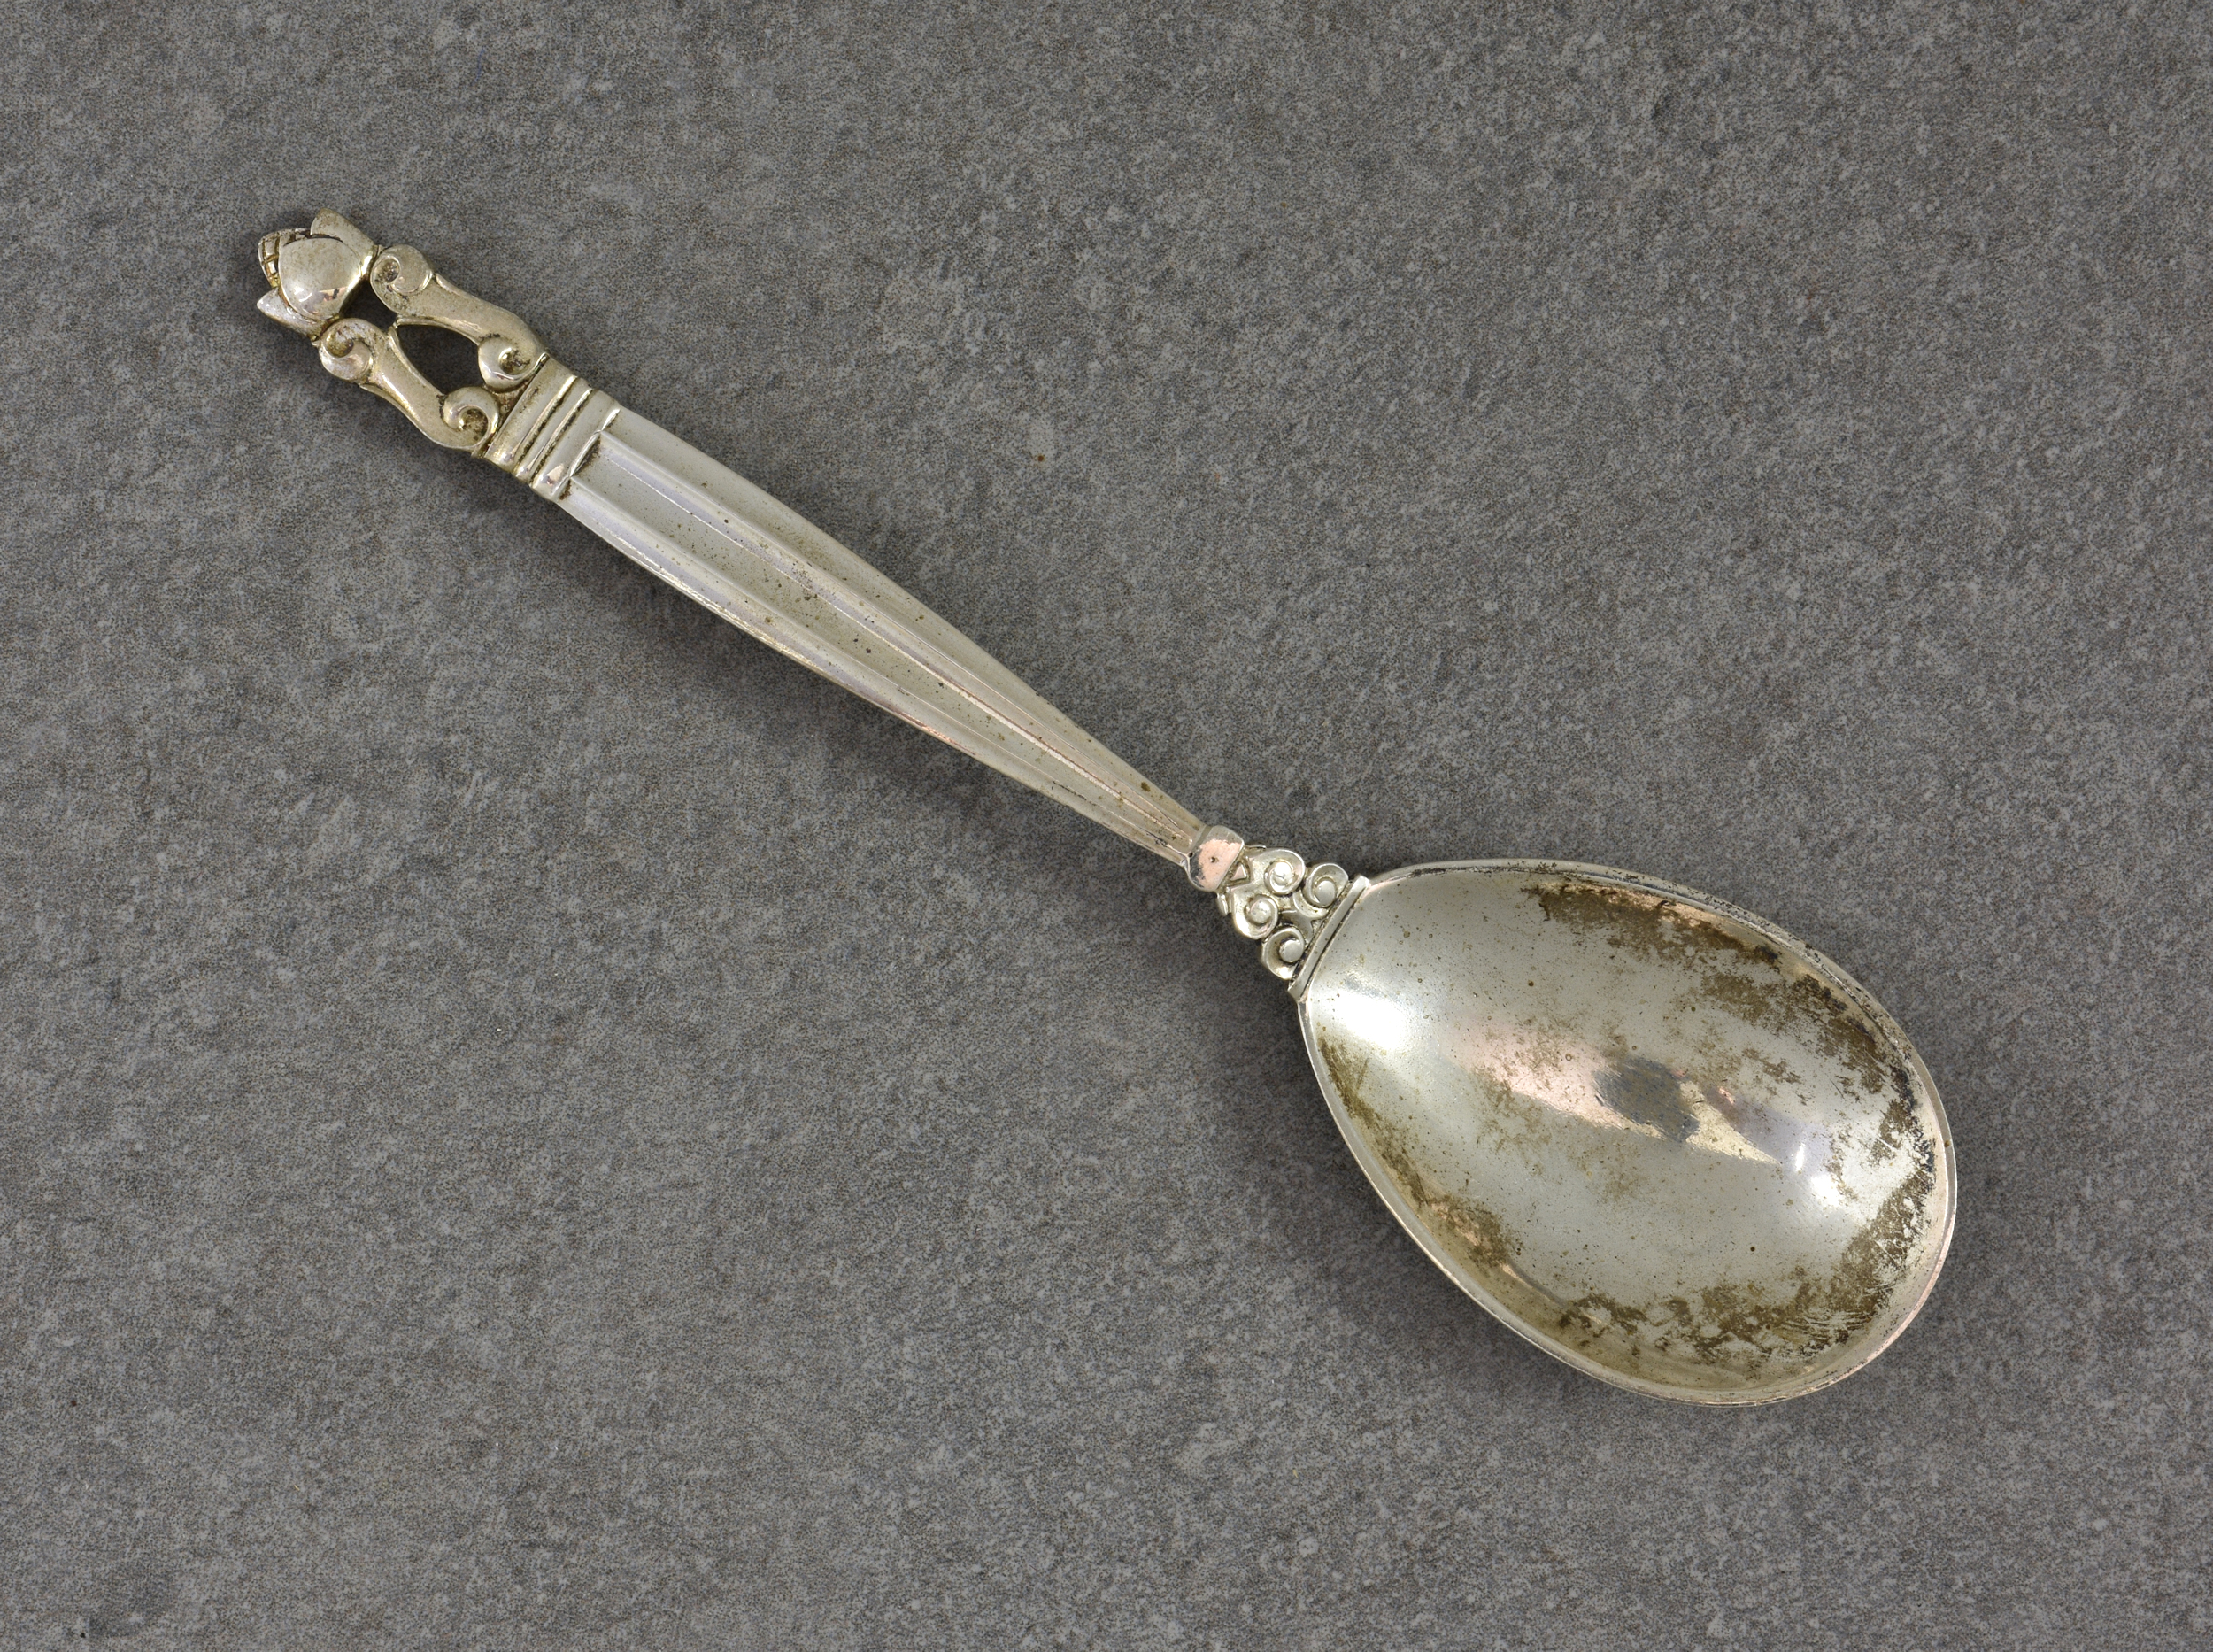 A Georg Jensen silver preserve or caddy spoon, London import marks for Stockwell & Co., 1930, with